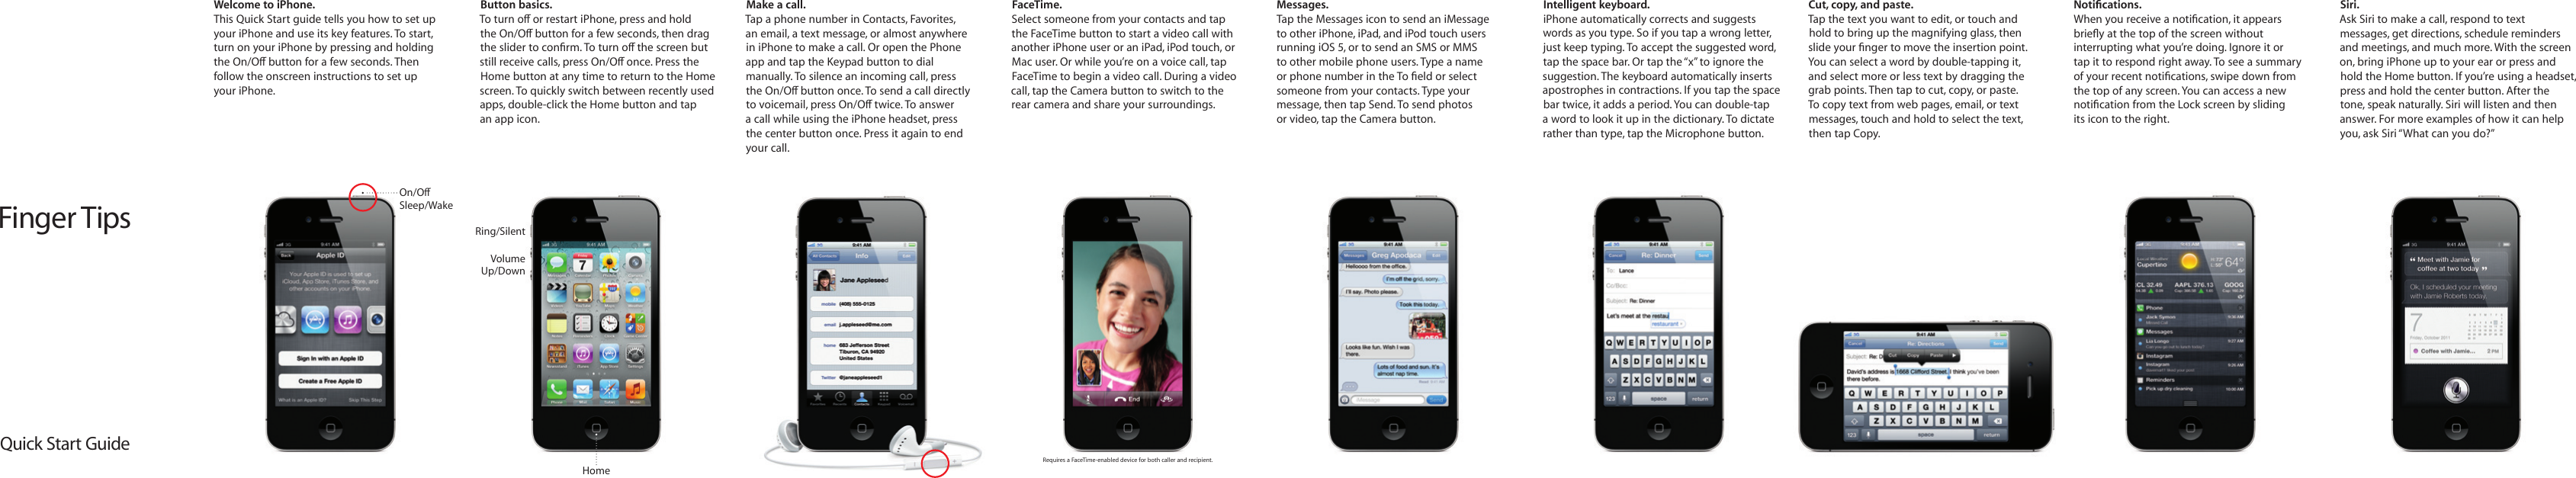 Page 1 of 2 - Apple IPhone4S User Manual I Phone4SFinger Tips-Quick Start Guide Iphone 4s Finger Tips